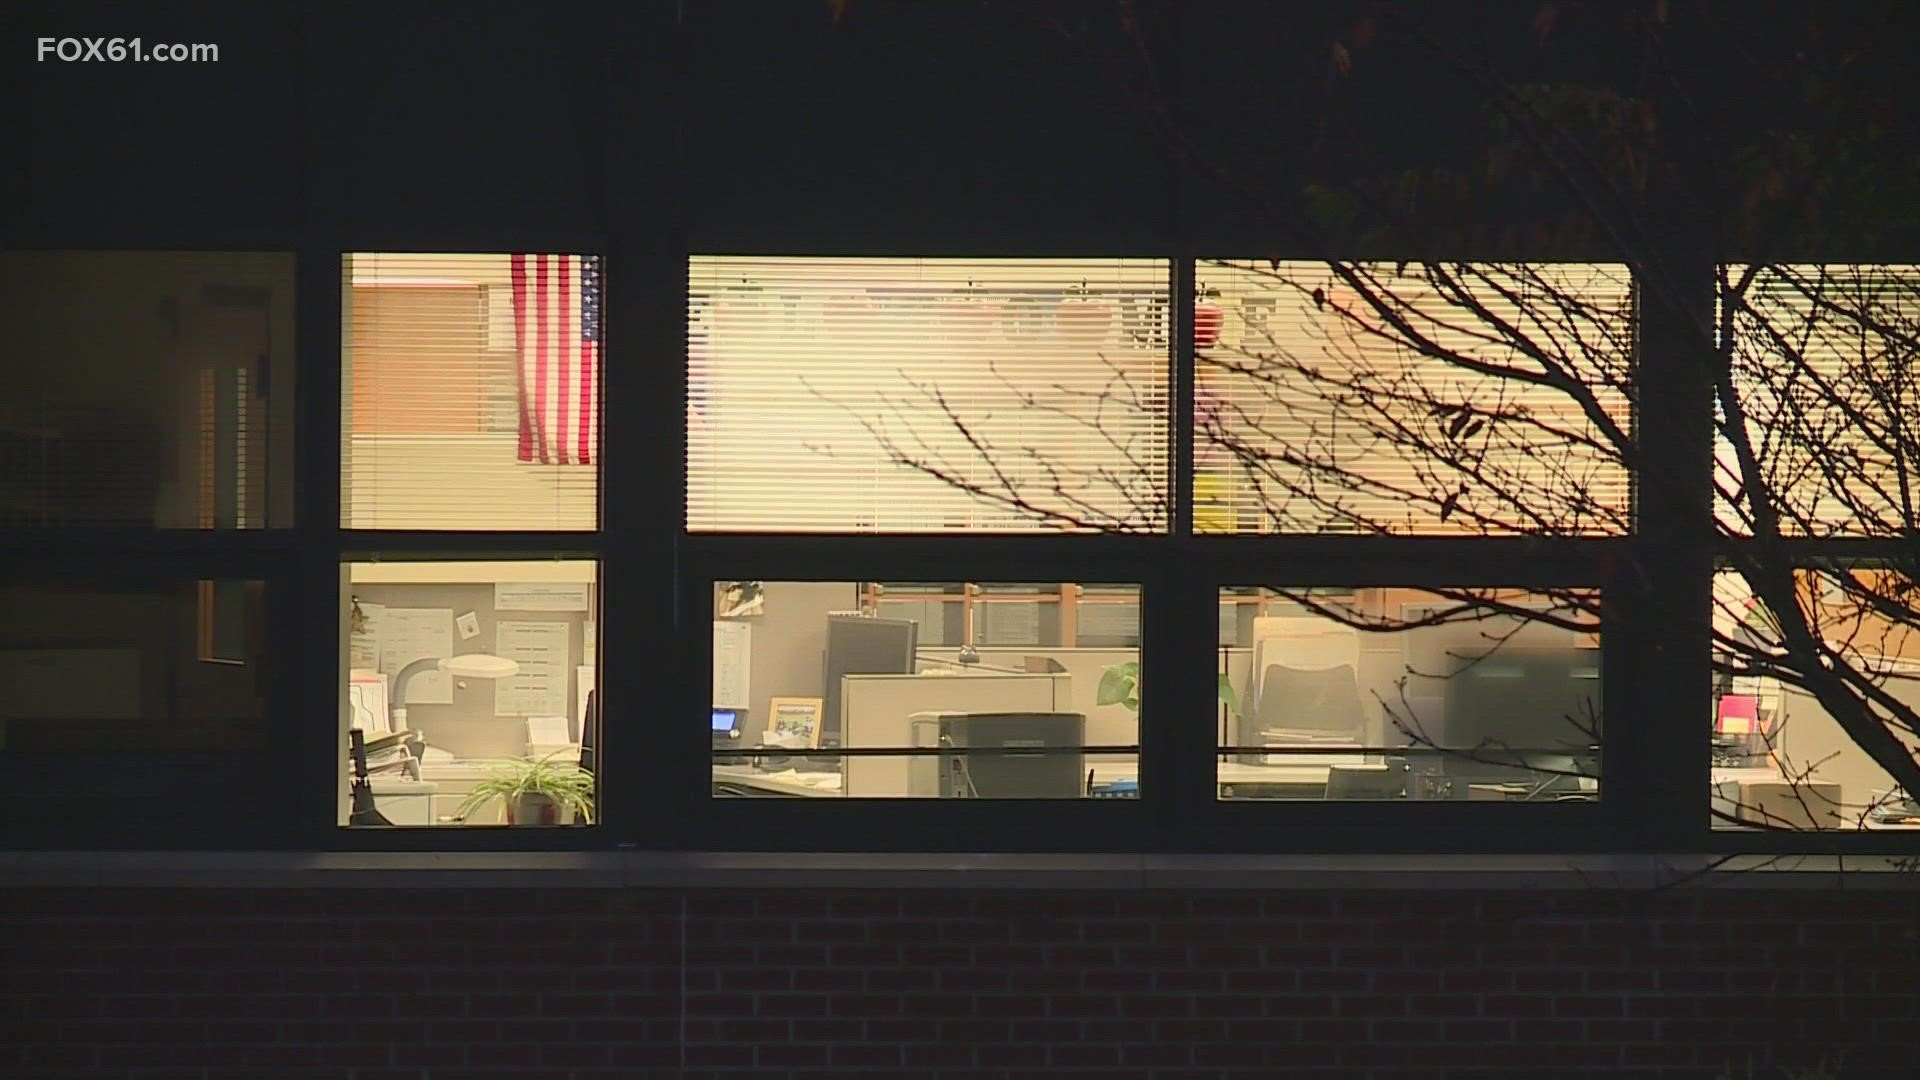 Swift Middle School will have a delayed opening due to the investigation.